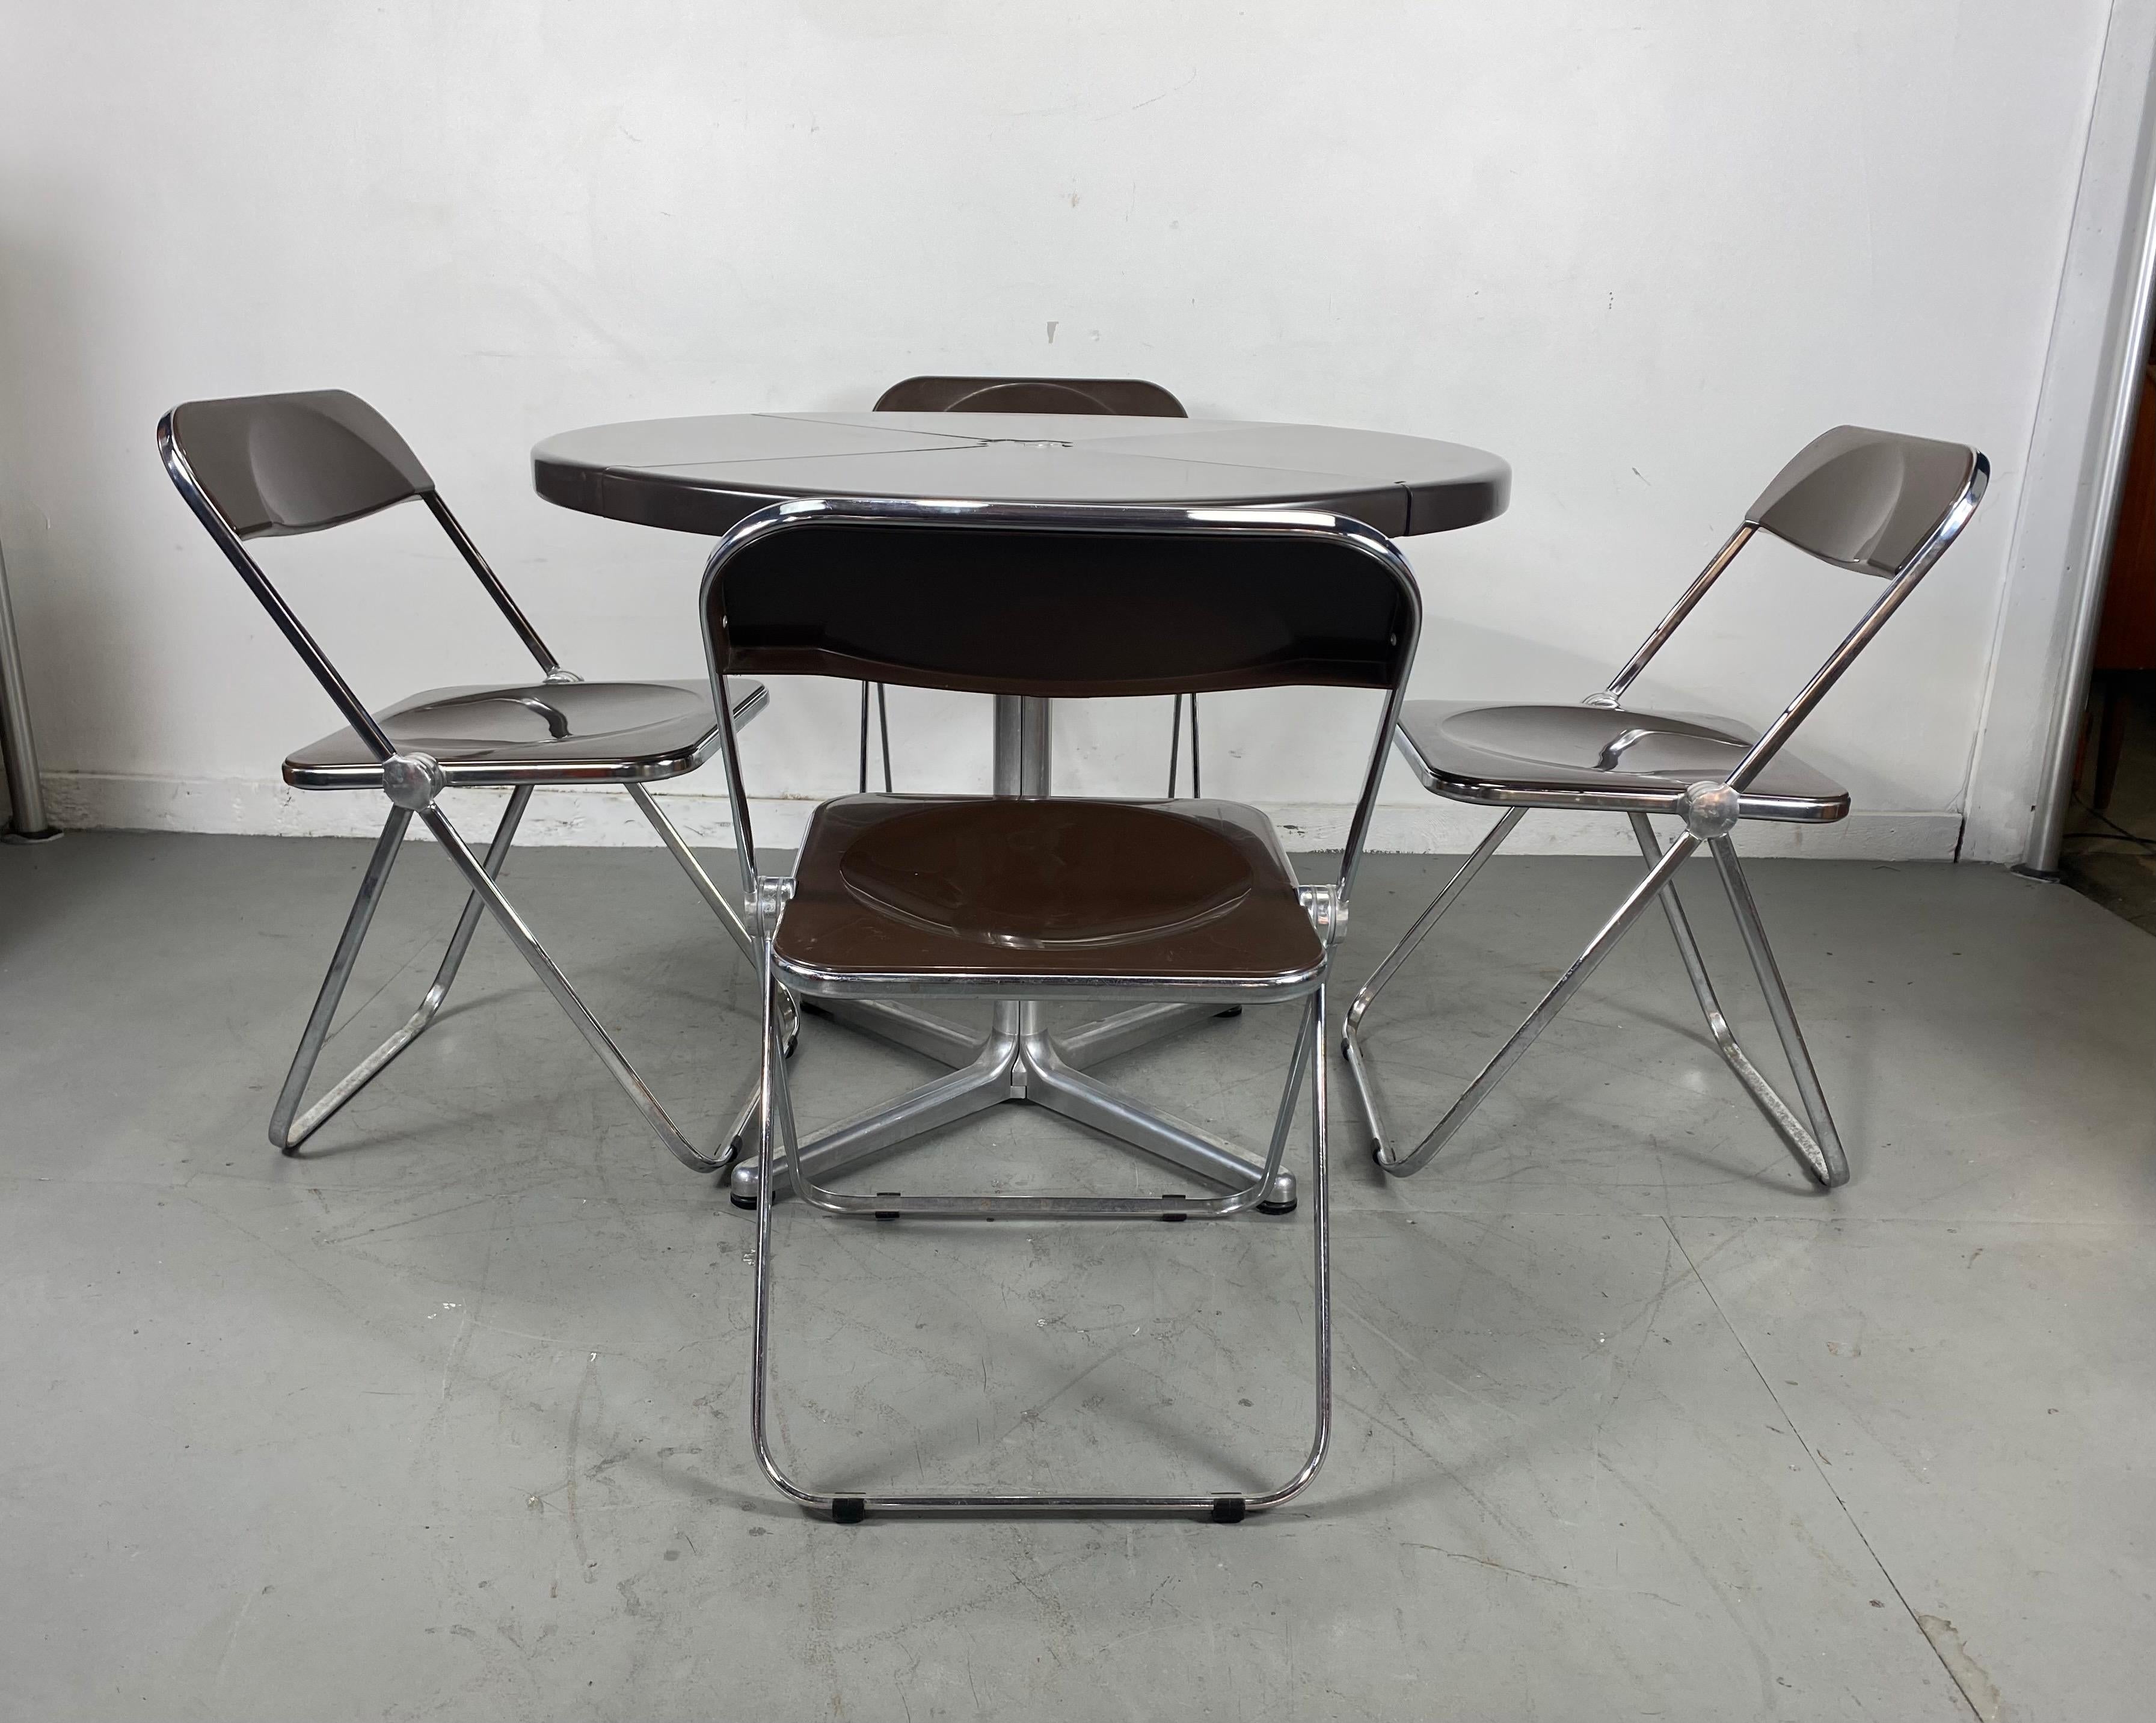 Late 20th Century Giancarlo Piretti for Castelli Modern 'Plia' Folding Table and Chairs, Italy